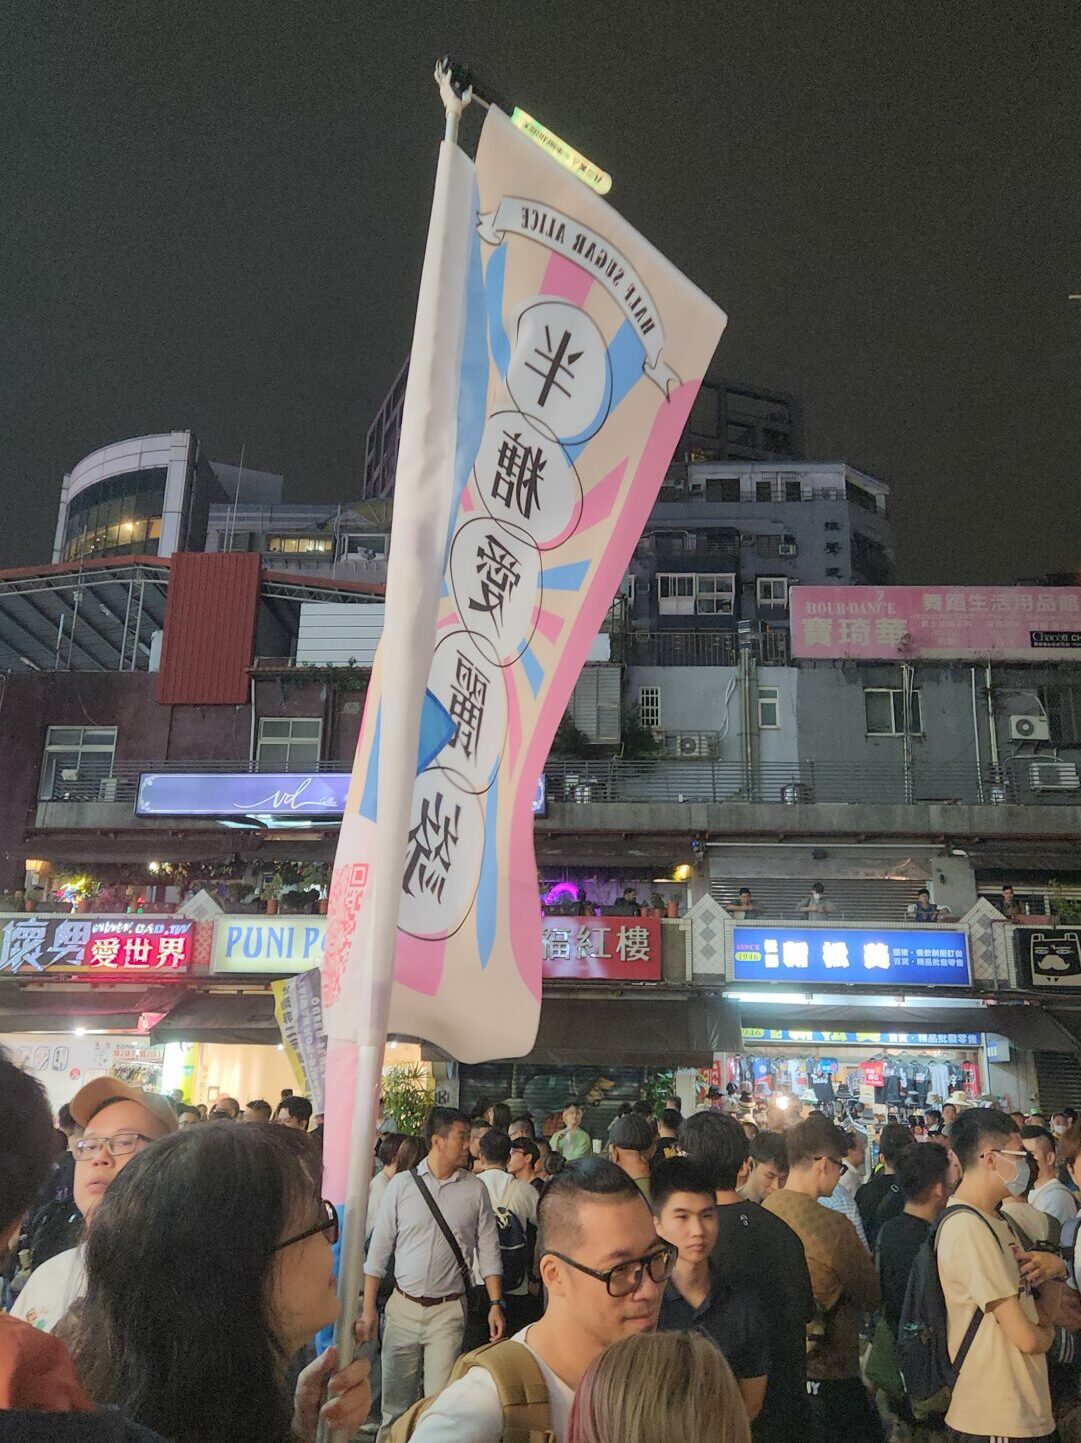 Crowds attend the Taiwan Trans March and wave a flag in Chinese characters